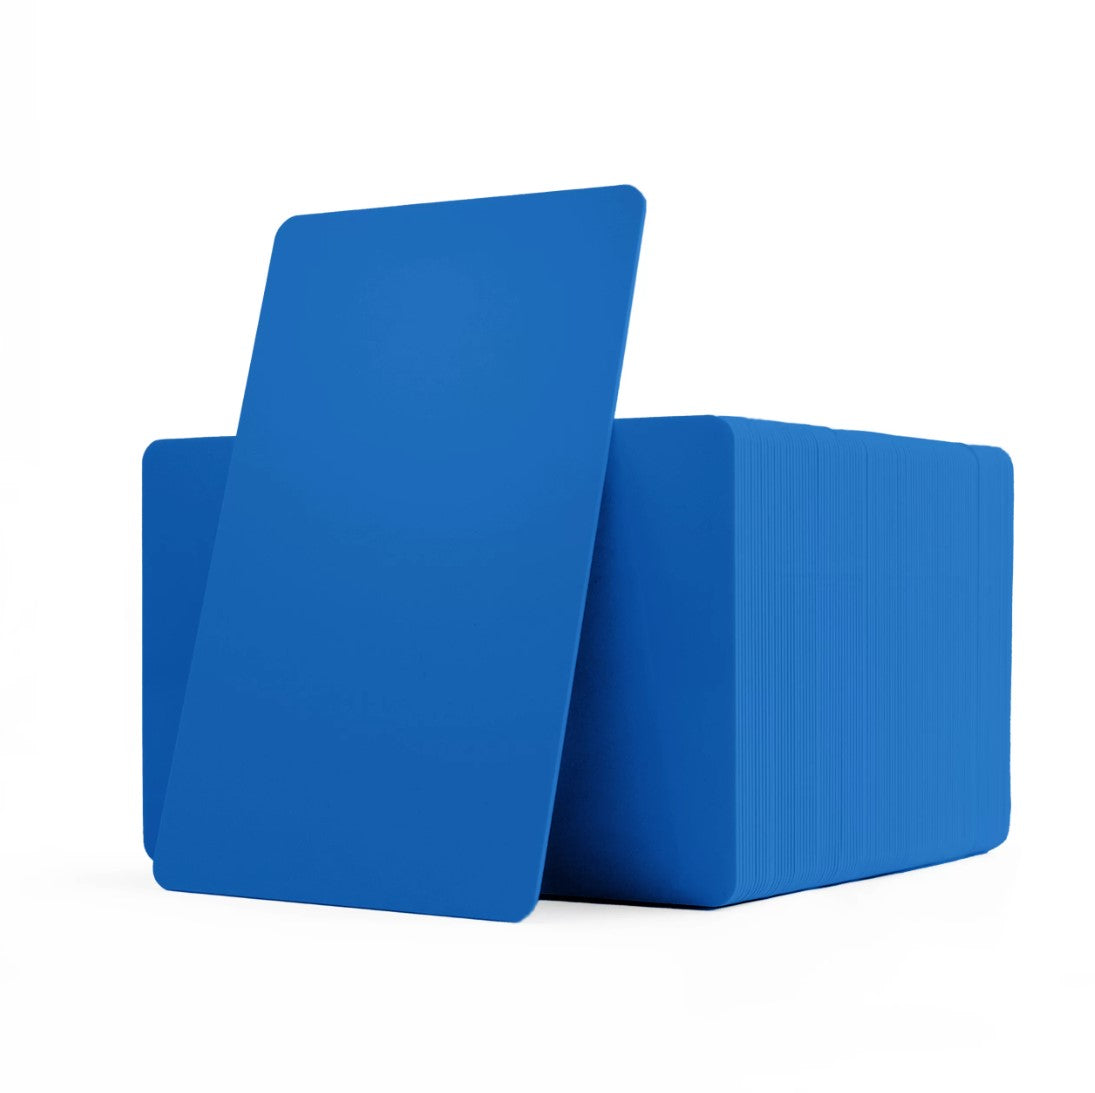 PVC CR80 Mid Blue Coloured Cards With Solid Core Coloured Edges - 1 - 100